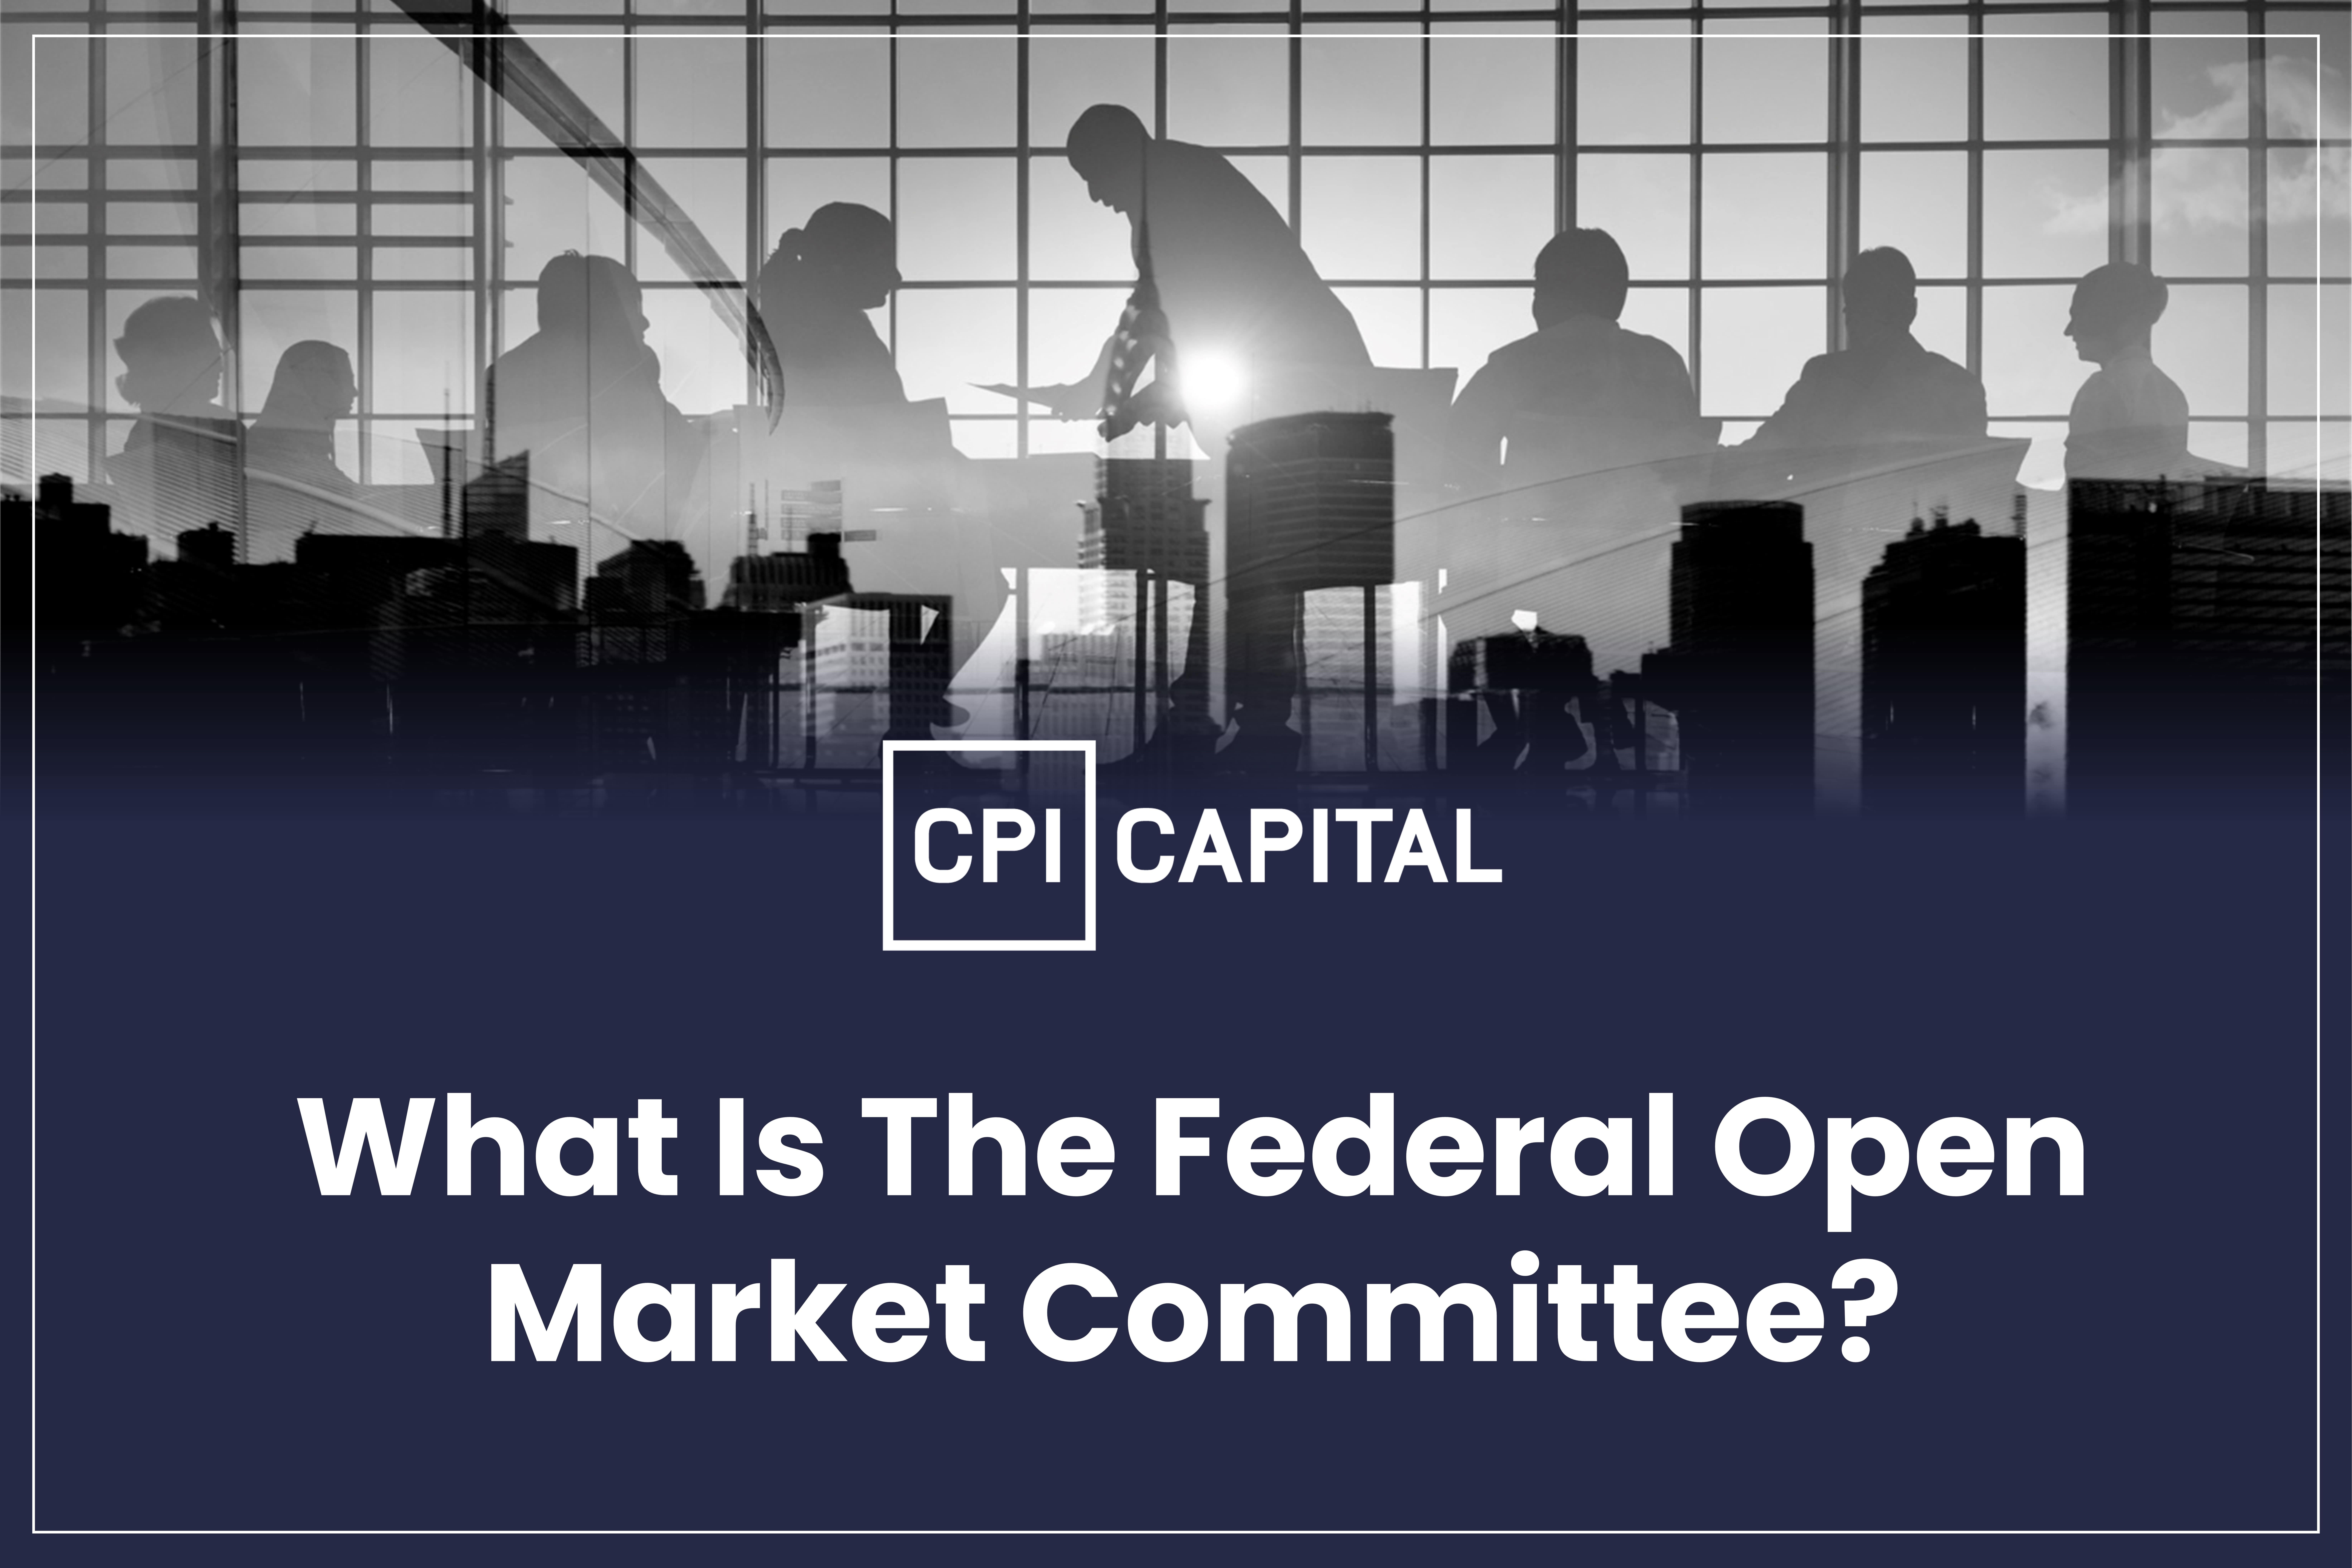 CPI capital_What Is The Federal Open Market Committee